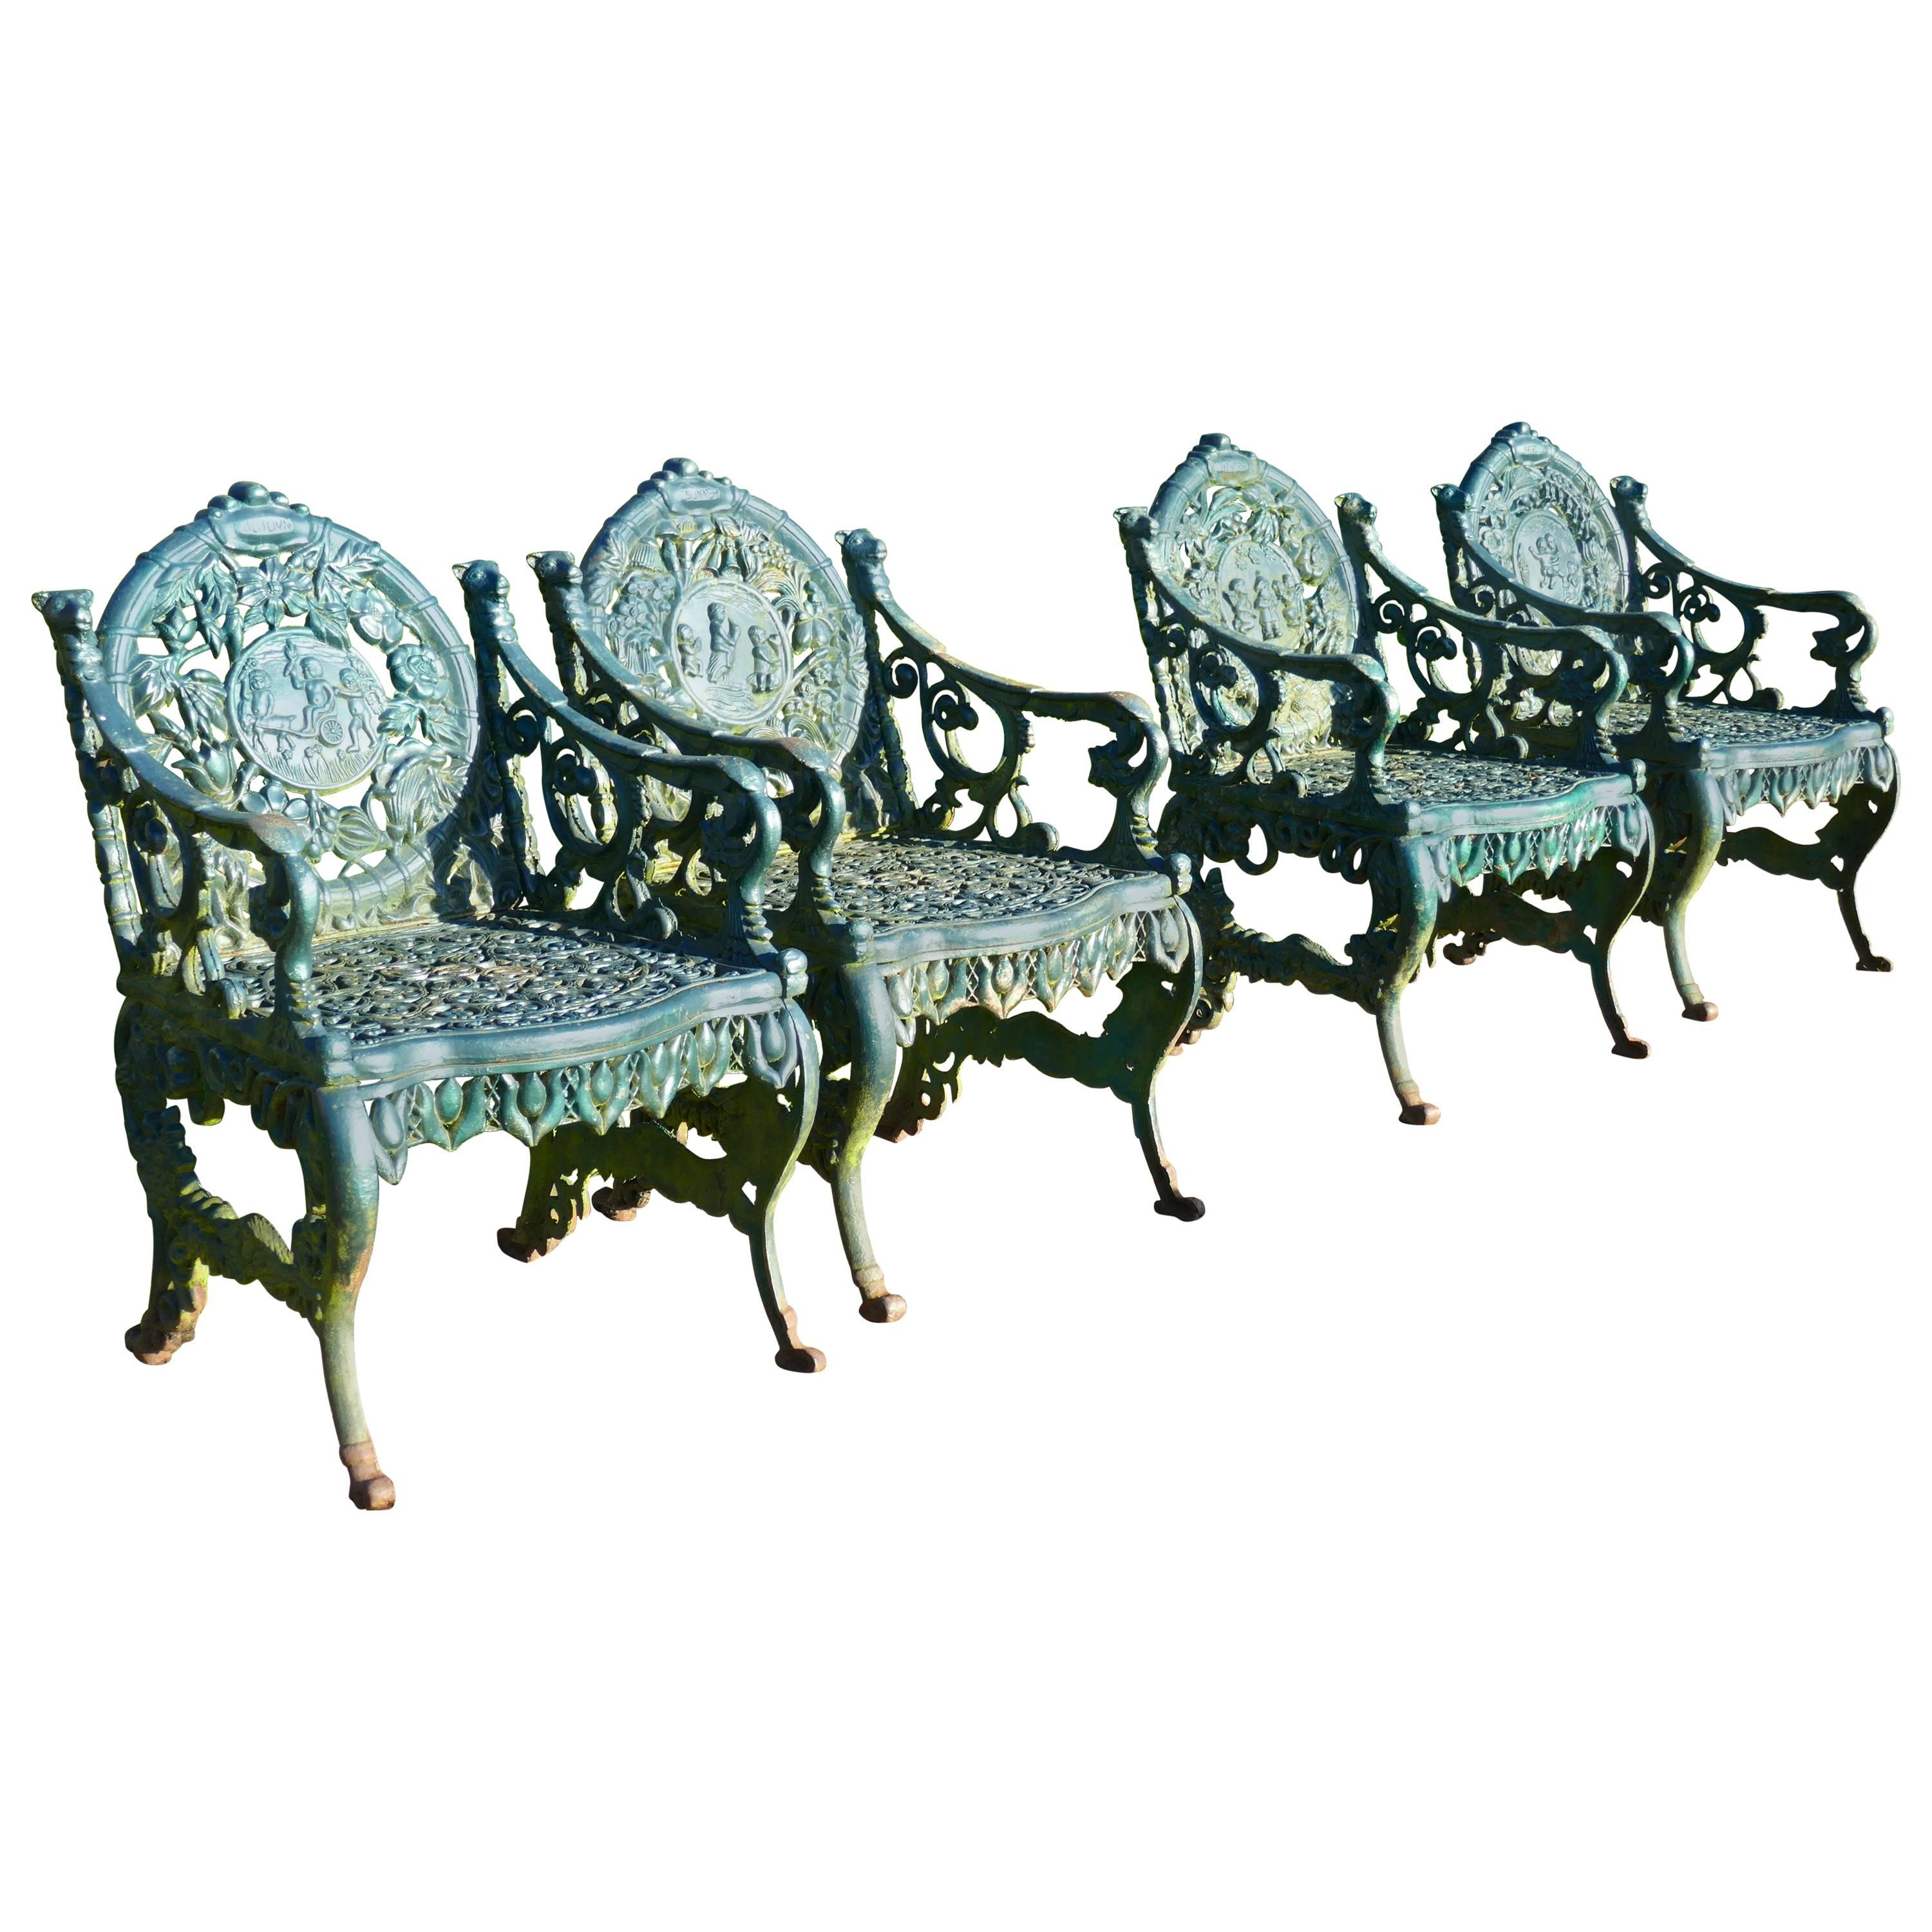 Set of Four Cast Iron Garden Armchairs, Four Seasons Plaques on the Backs